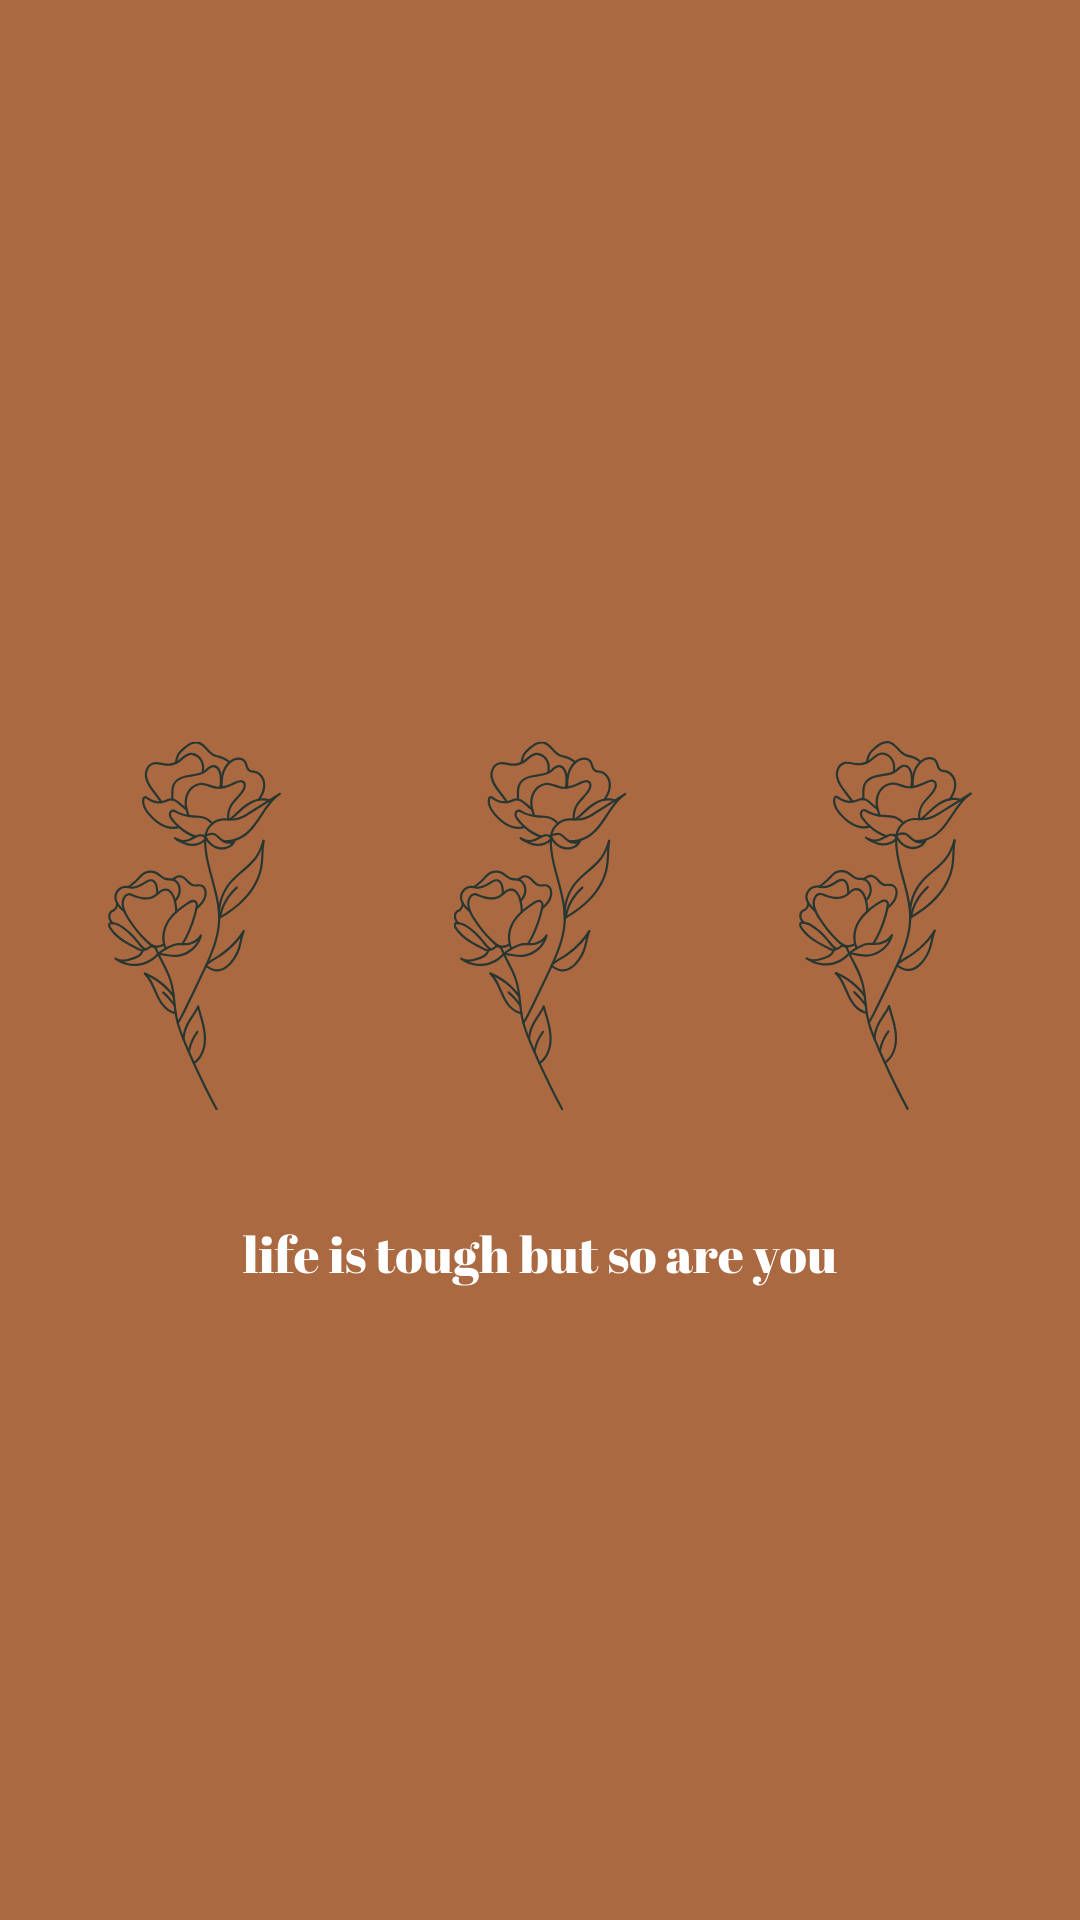 Life is tough but are you - Boho